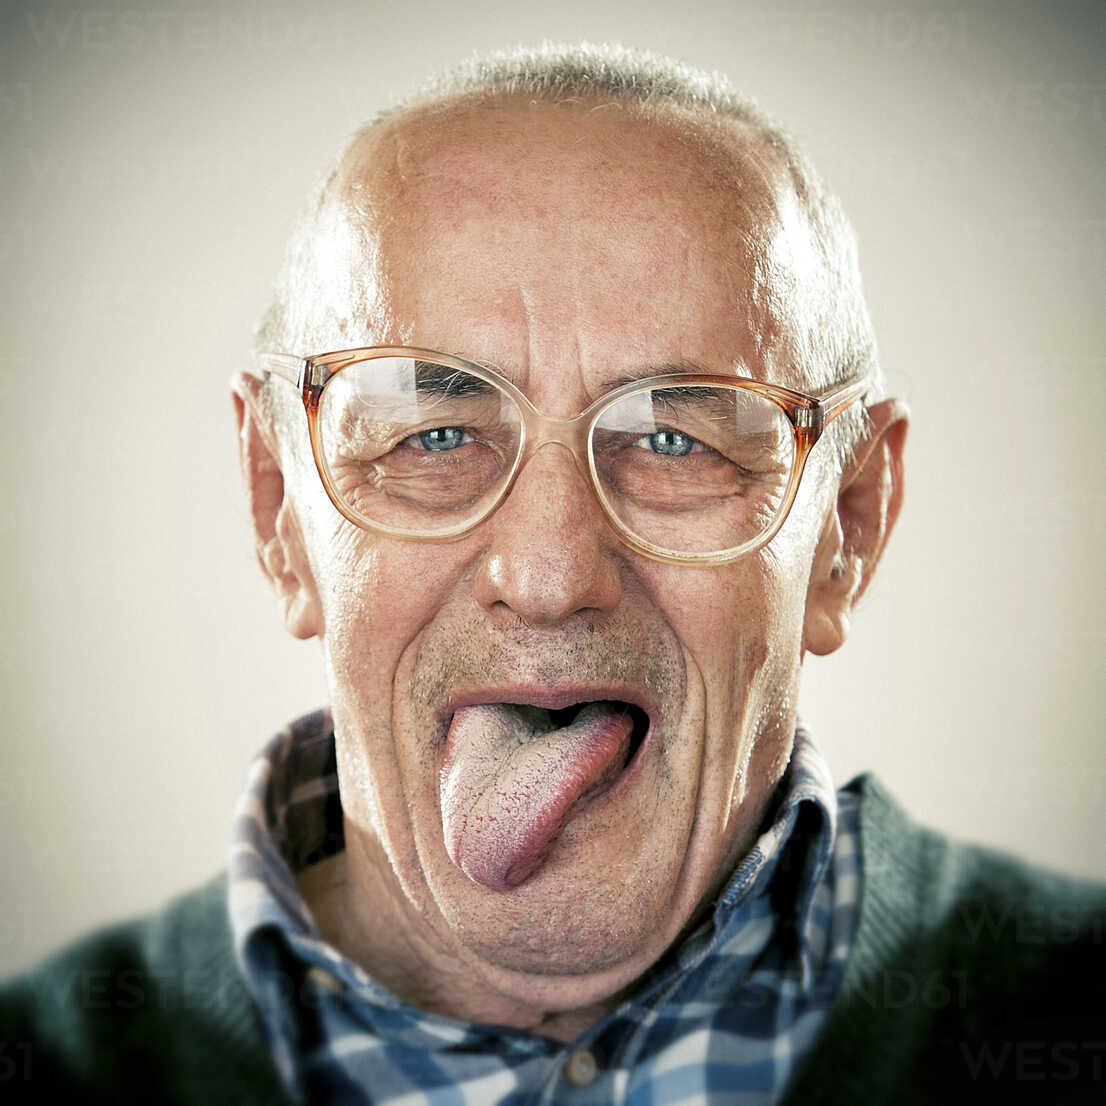 Portrait Of An Elderly Man Sticking His Tongue Out ZOCF00175 